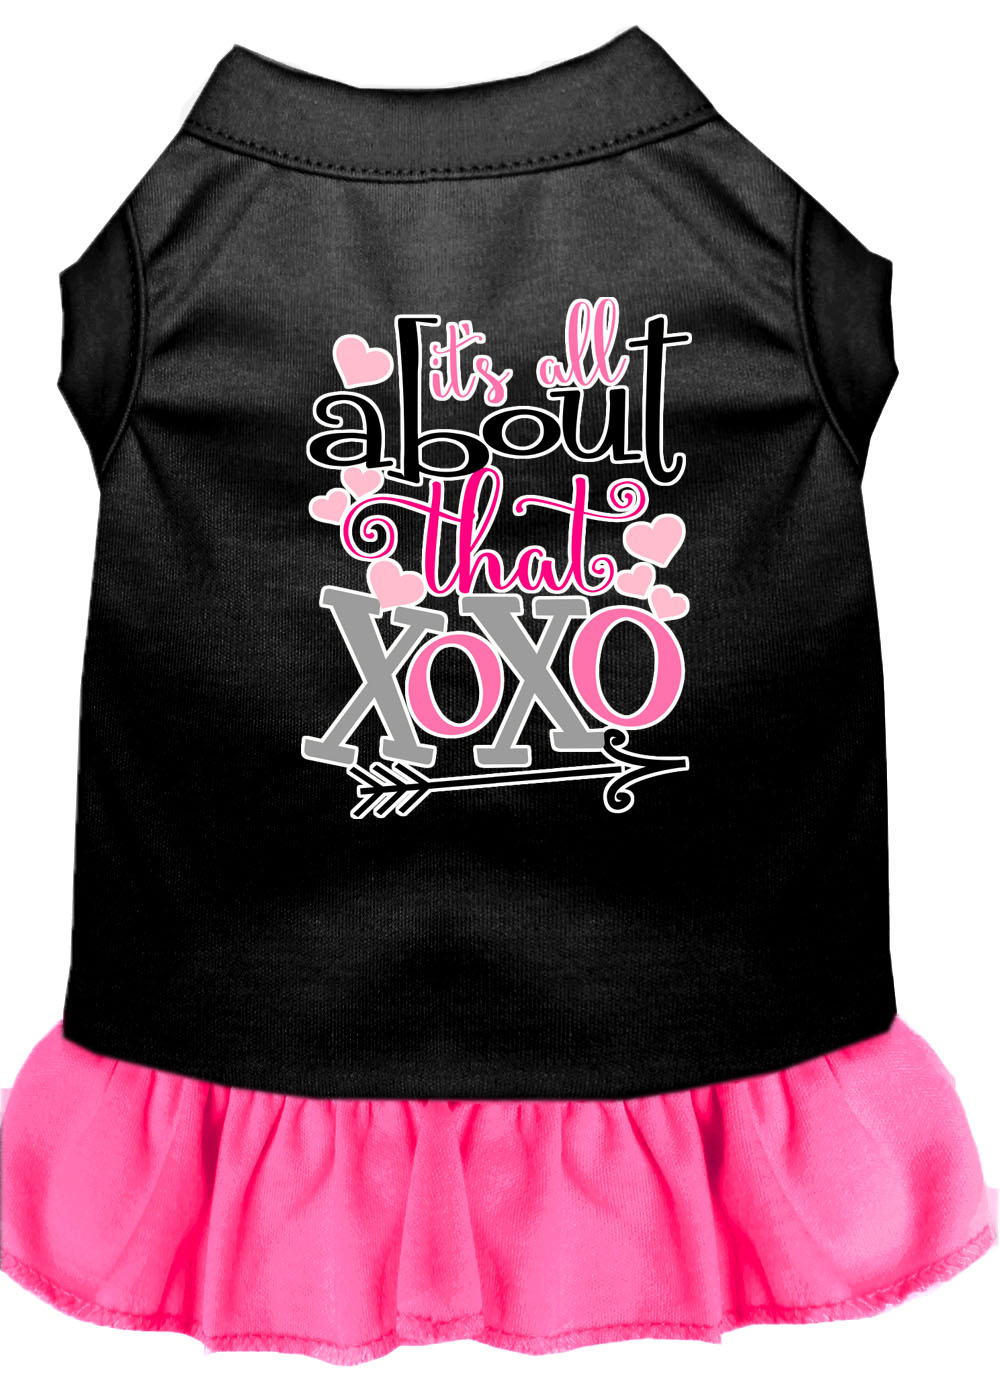 All about the XOXO Screen Print Dog Dress Black with Bright Pink XL